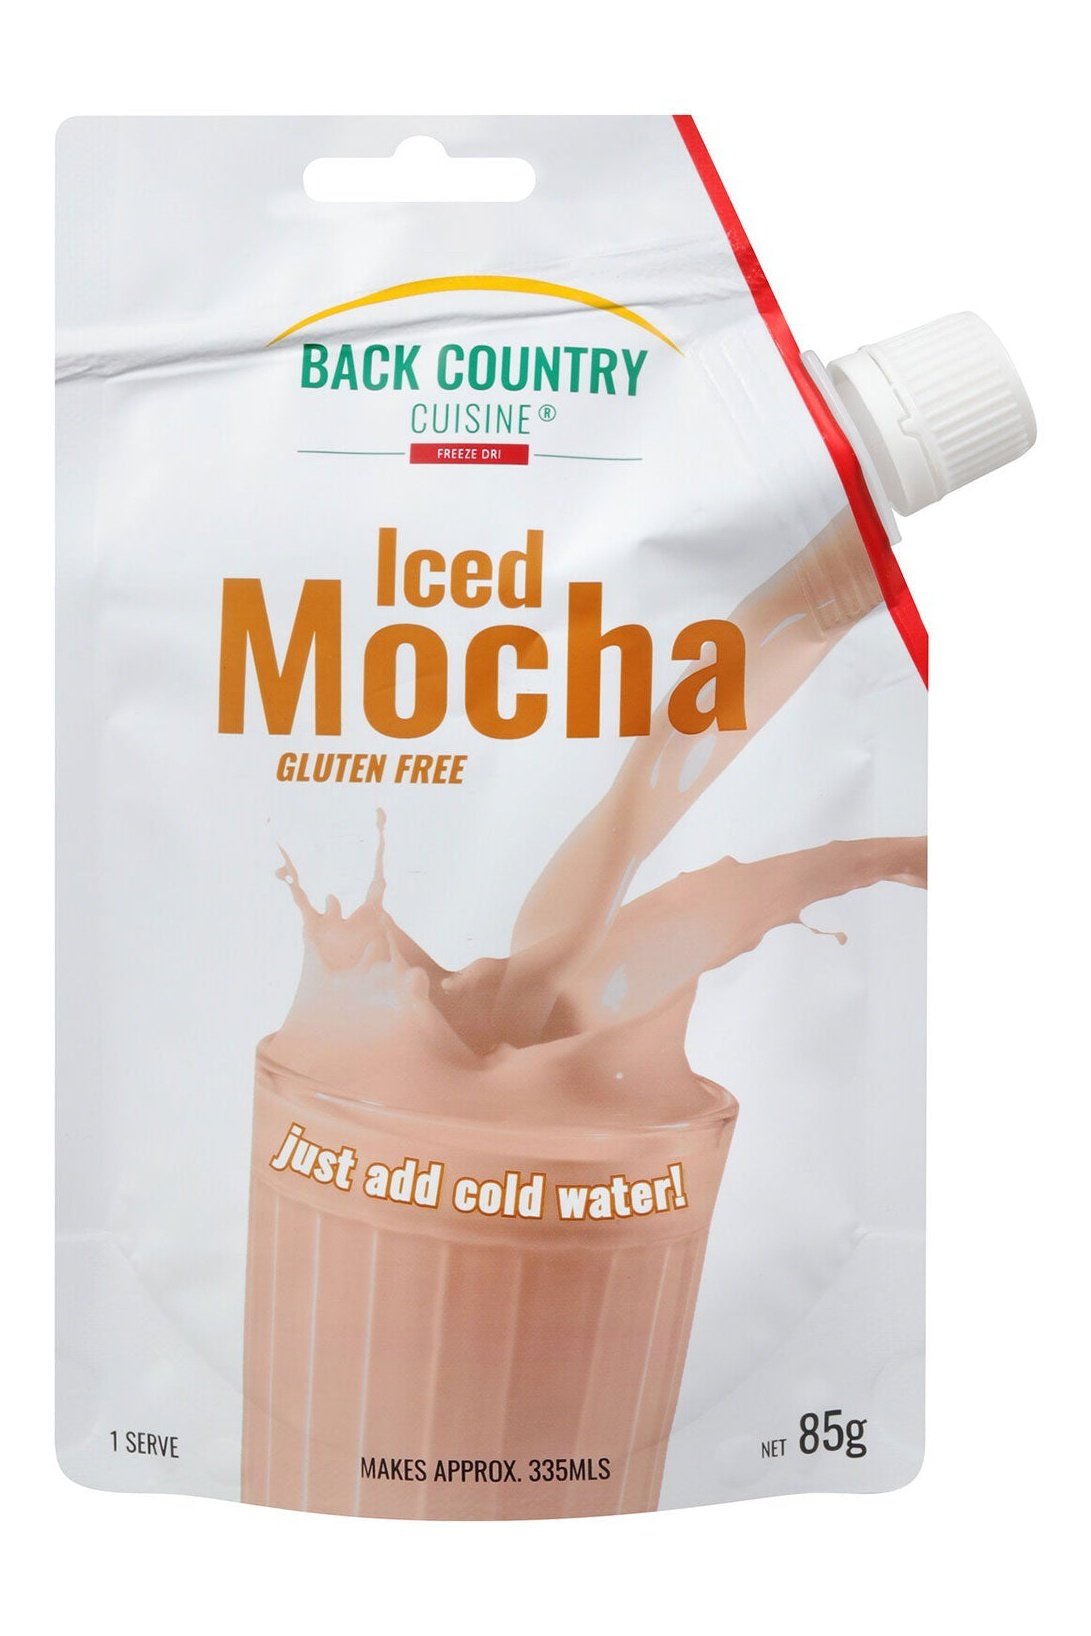 Back Country Cuisine - Iced Mocha Back Country Cuisine Rugged Ram Outdoors